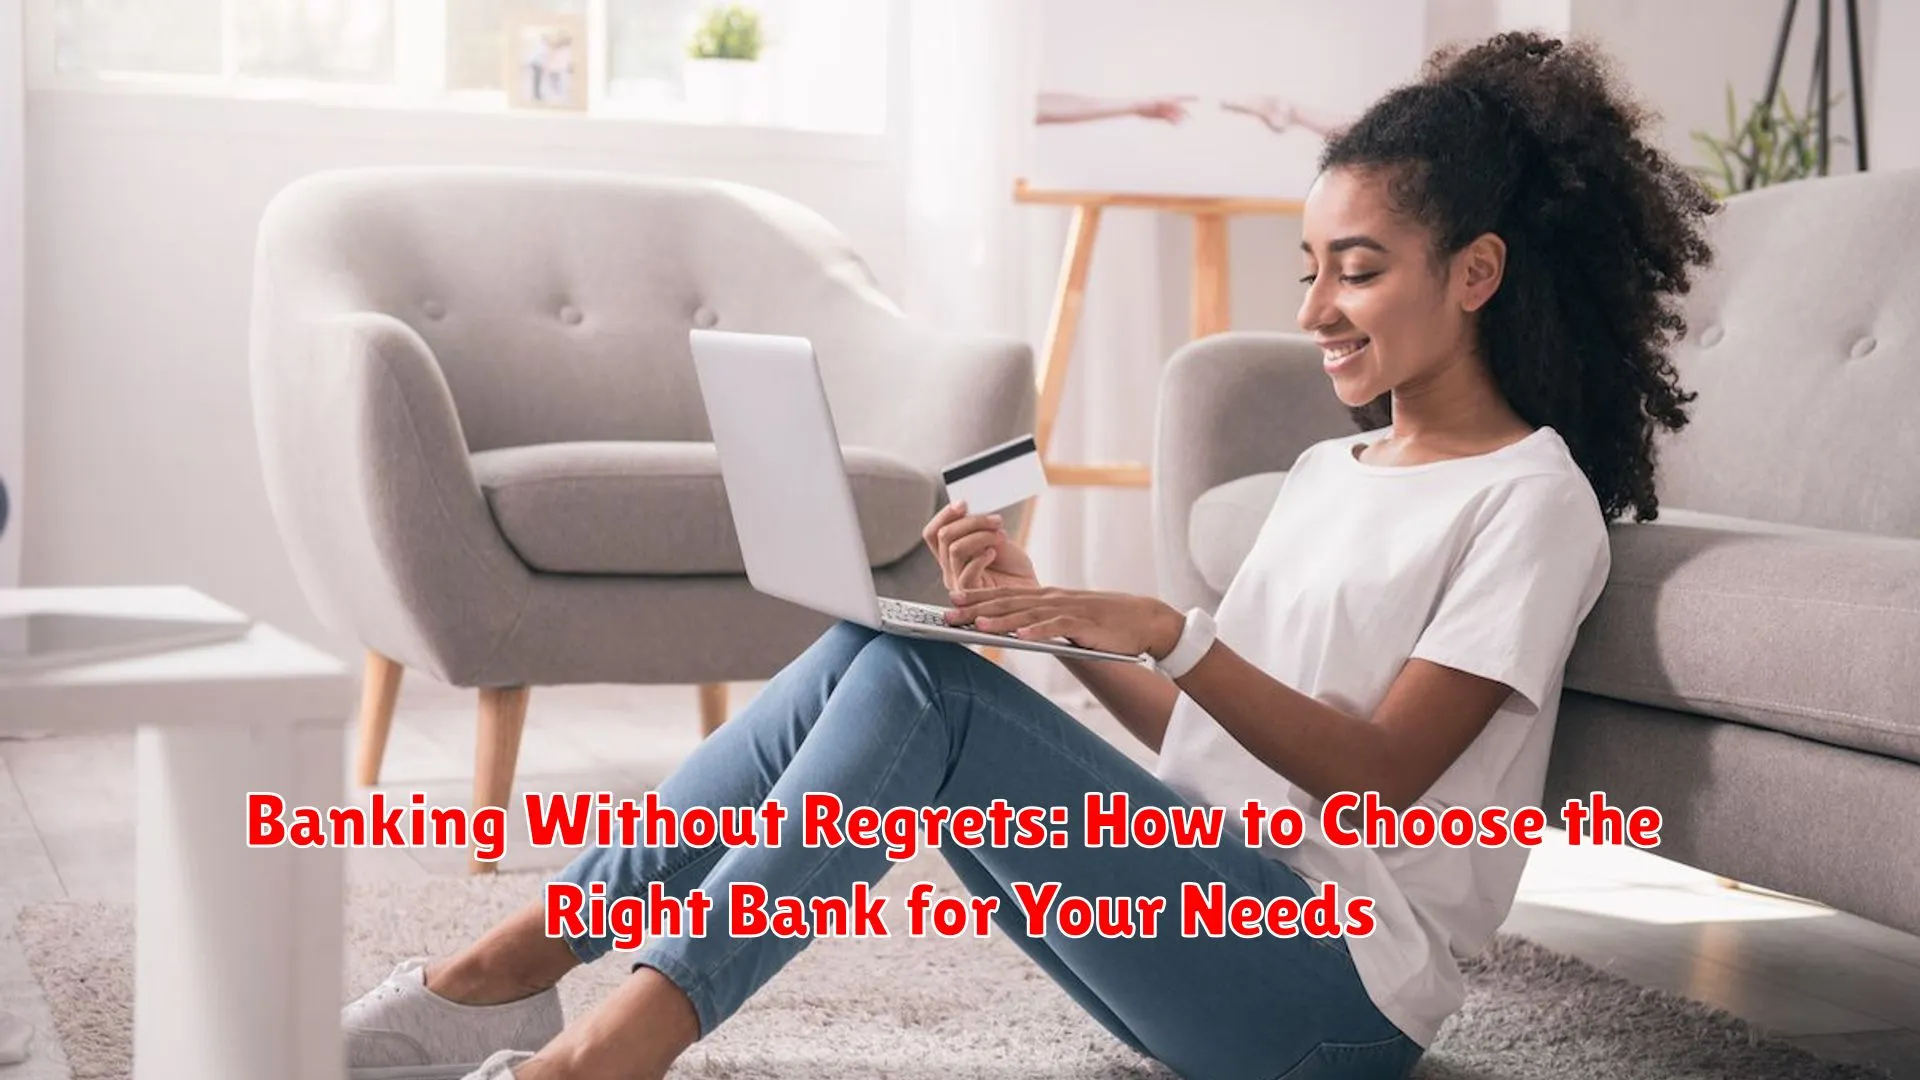 Banking Without Regrets: How to Choose the Right Bank for Your Needs